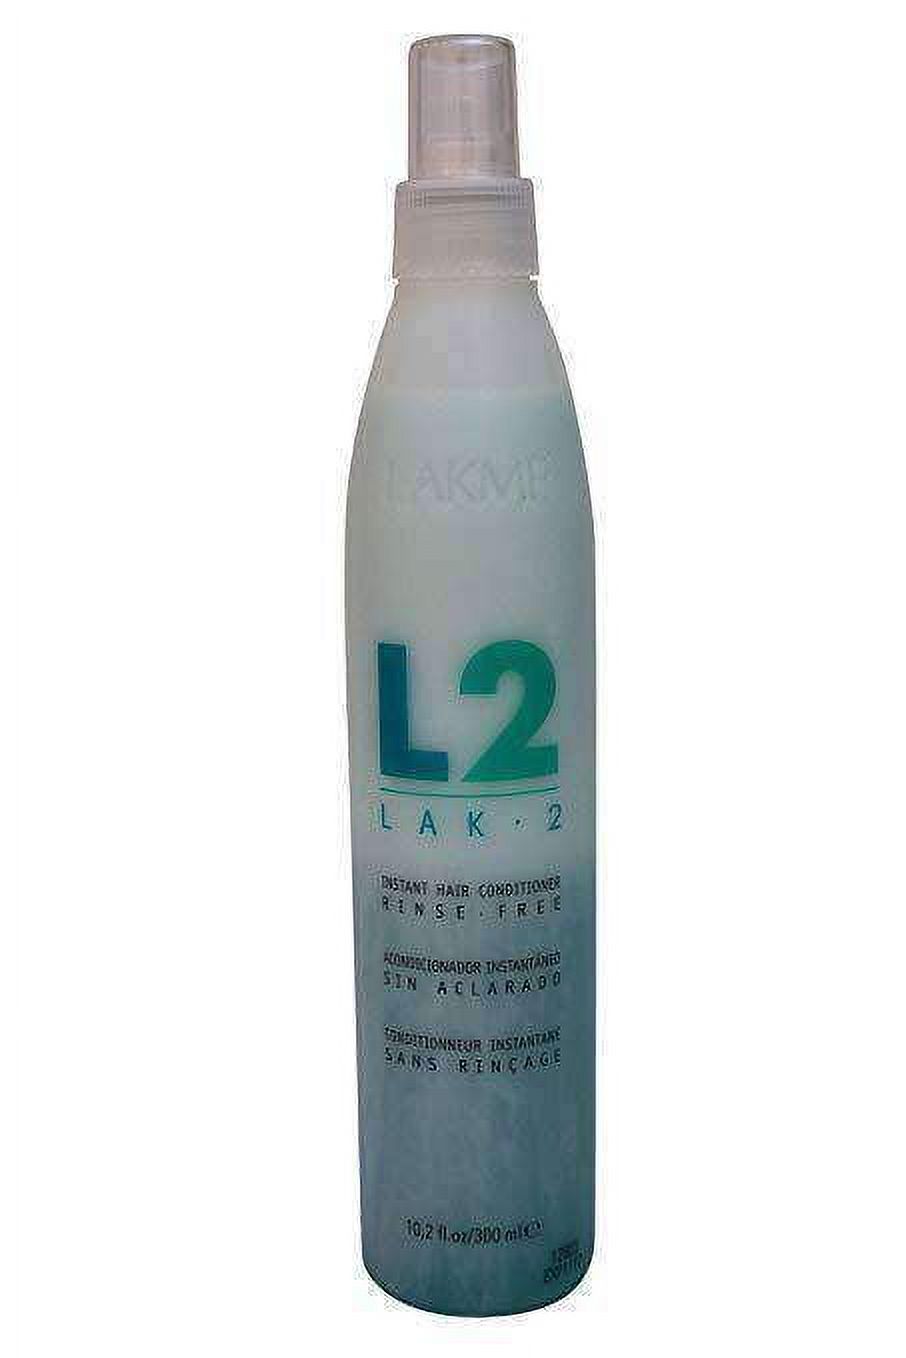 Lakme Lak 2 Instant Hair Conditioner 10.2 Oz - image 2 of 2